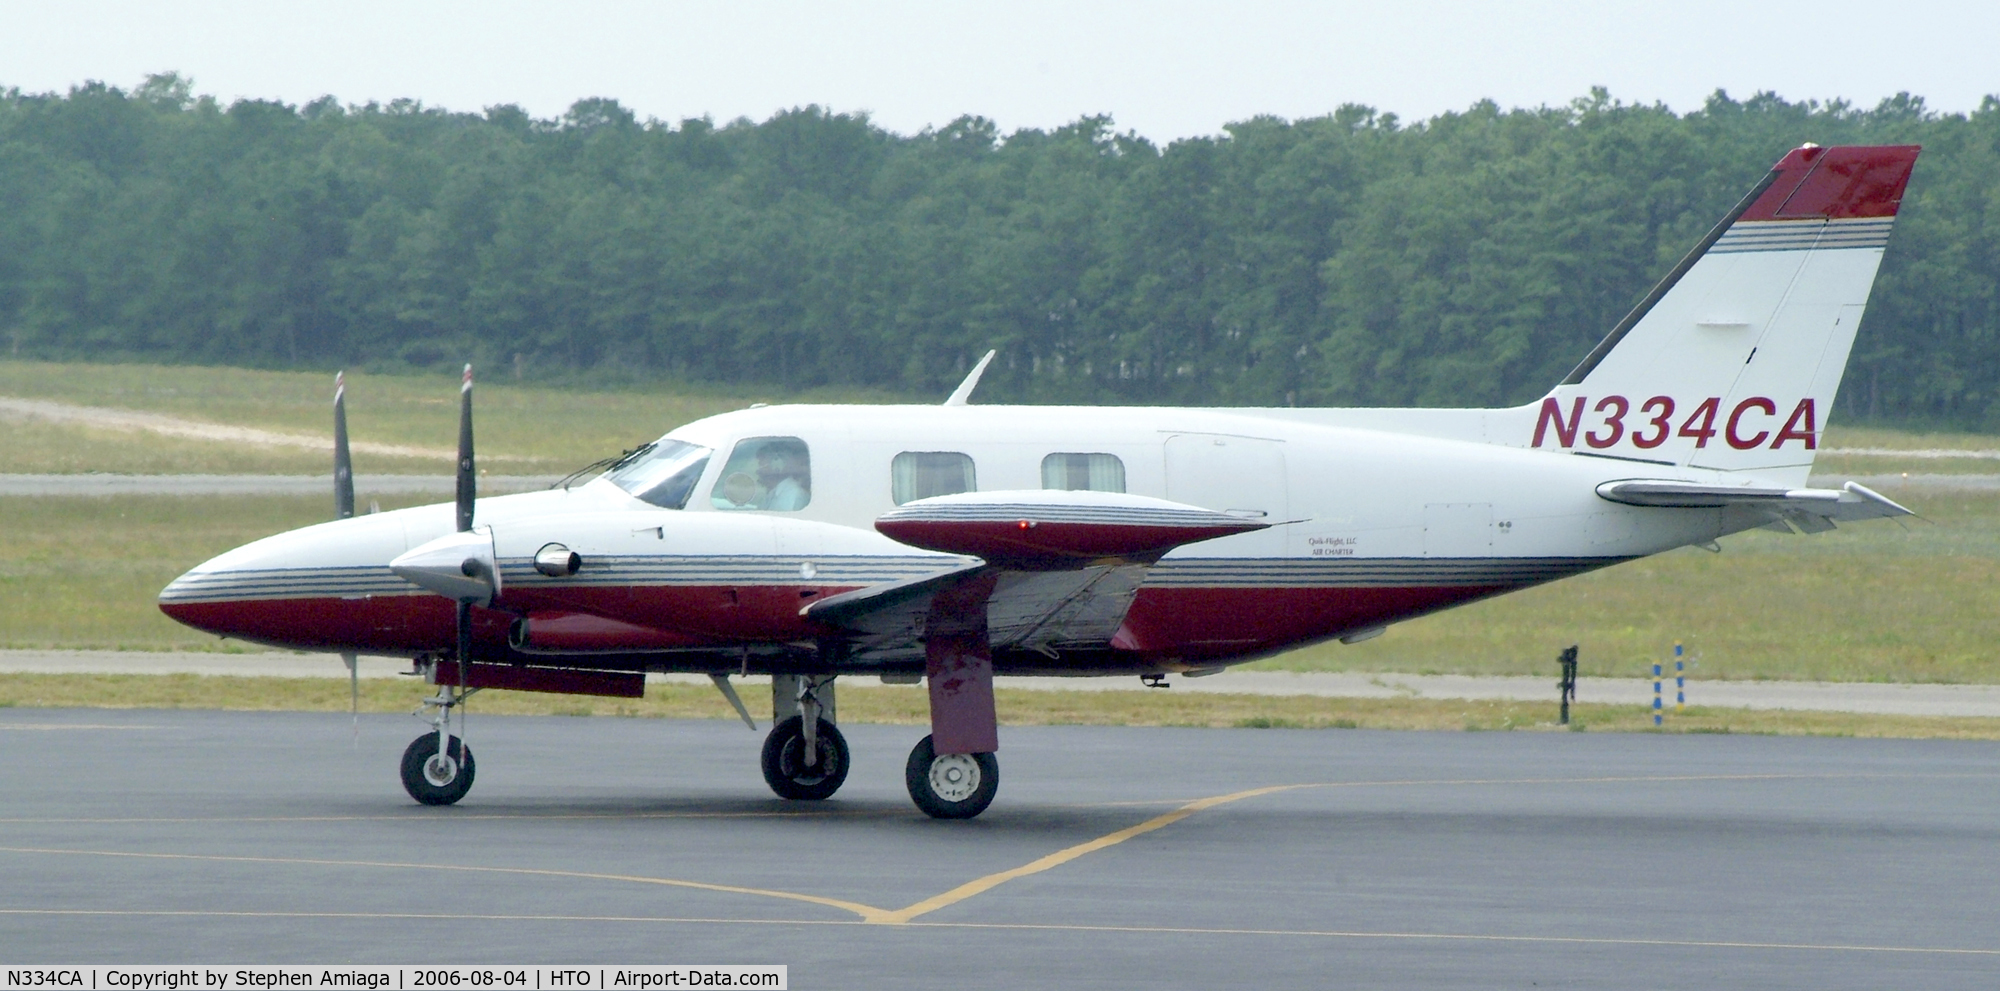 N334CA, 1979 Piper PA-31T1 C/N 31T7904034, Operated by Quick-Flite out of Albany, a beautiful Cheyenne...